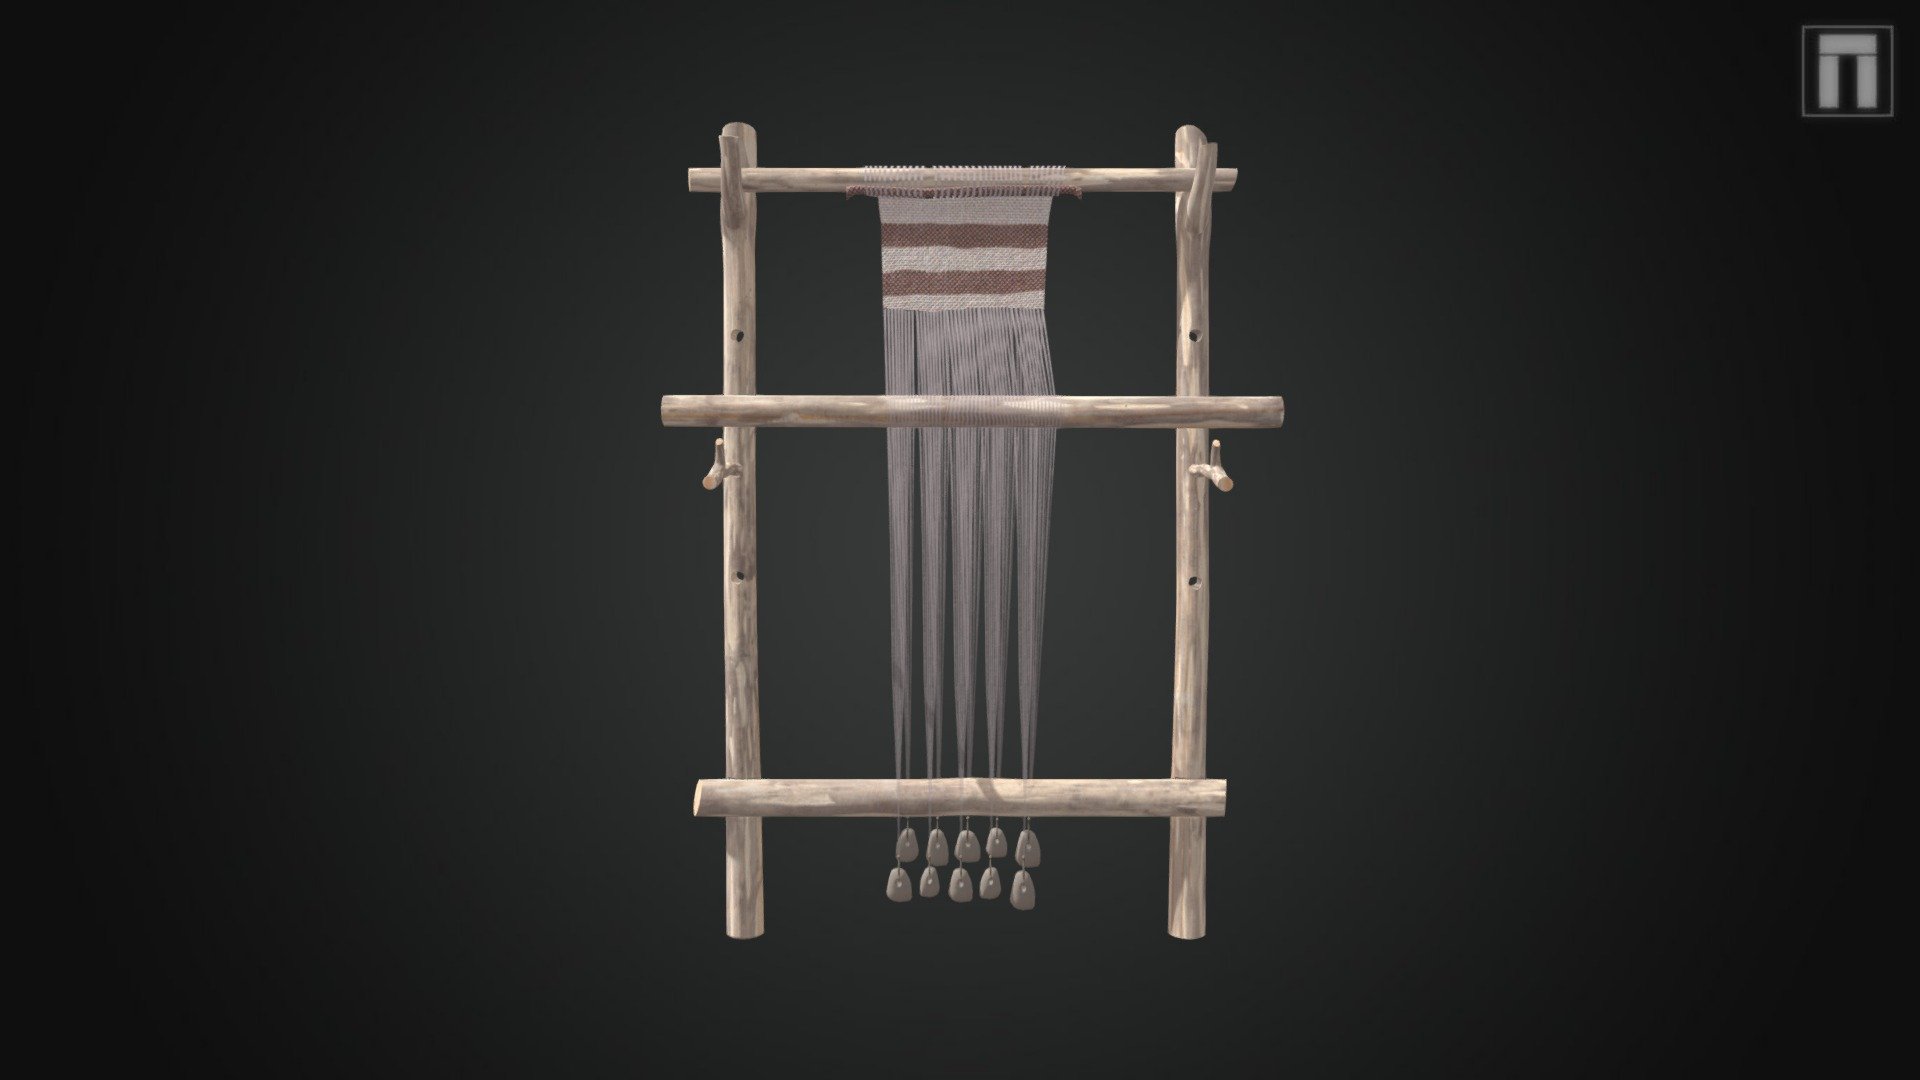 3D Reconstruction of a Bronze Age warp weighted loom for an upcoming VR model based on an unsual settlement near Westbury. The model is a composite based on finds from British archaeological sites 3d model